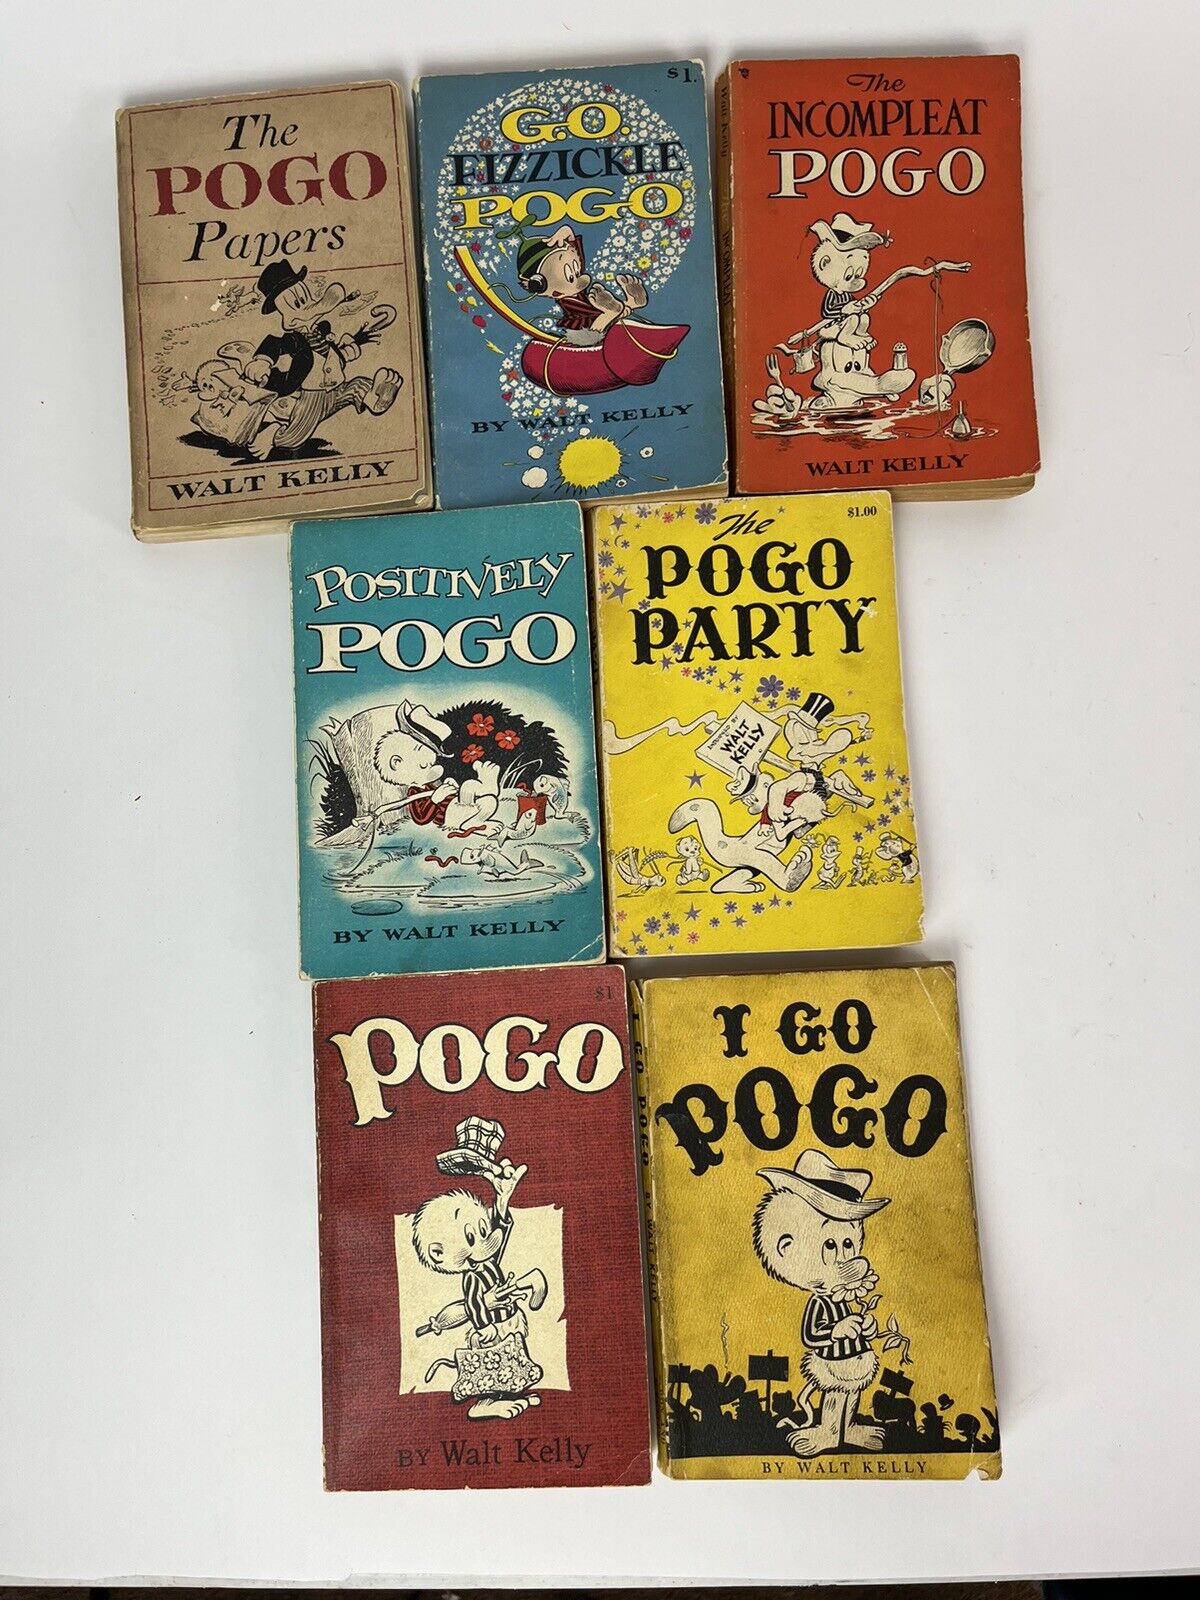 POGO Comic Books by Walt Kelly 5 Books Are First Editions LOT OF 7 Vintage